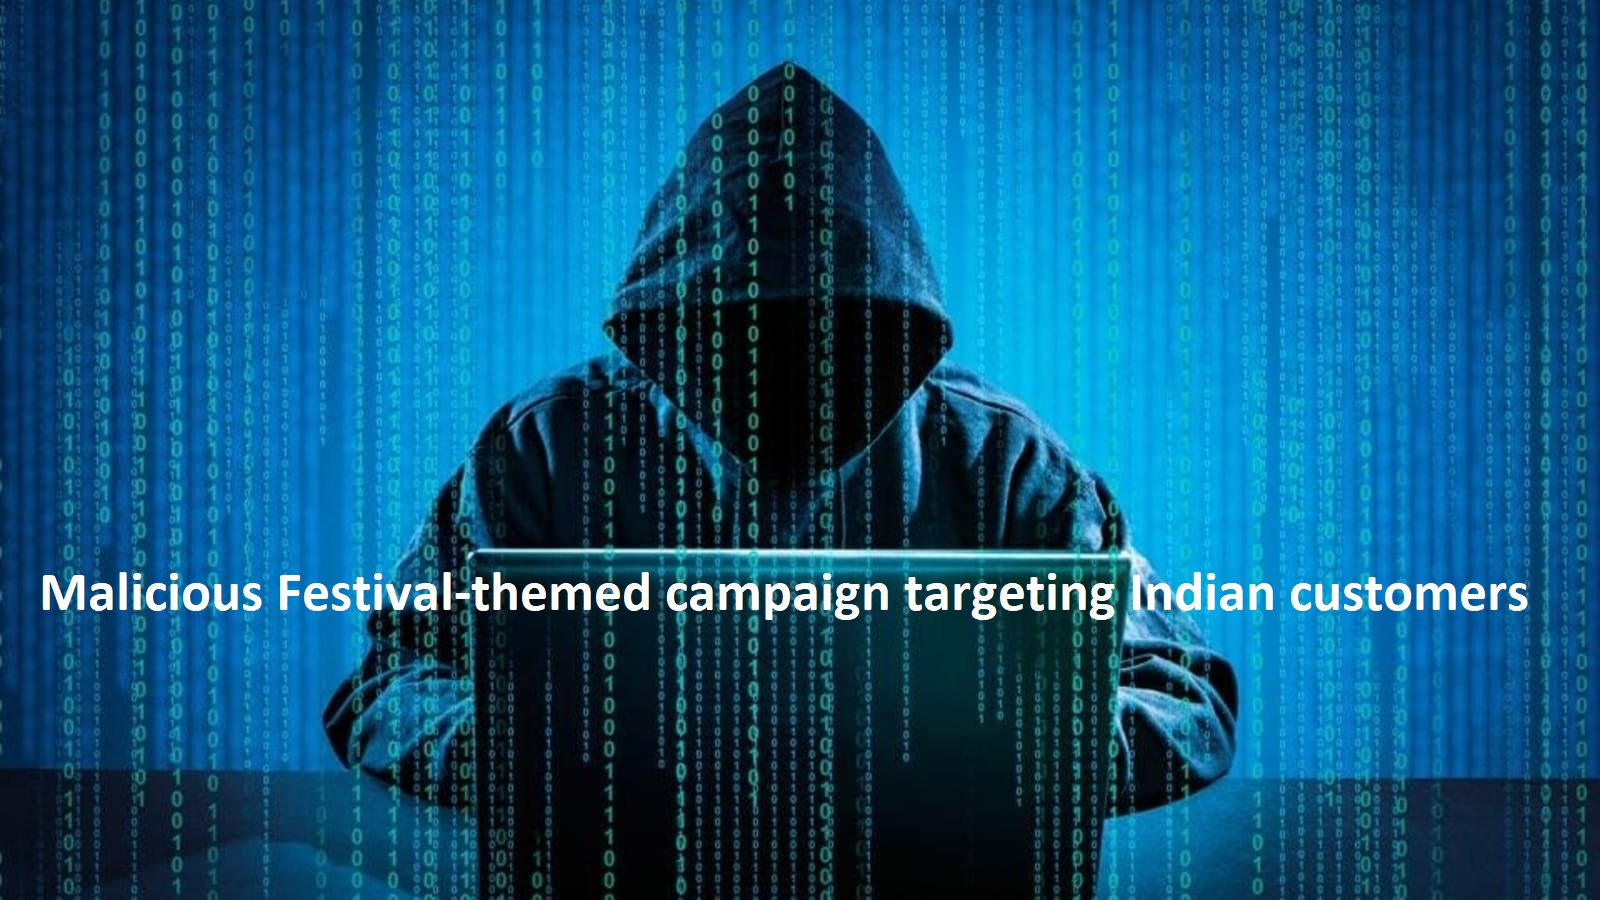 Malicious Festival-themed campaign targeting Indian customers